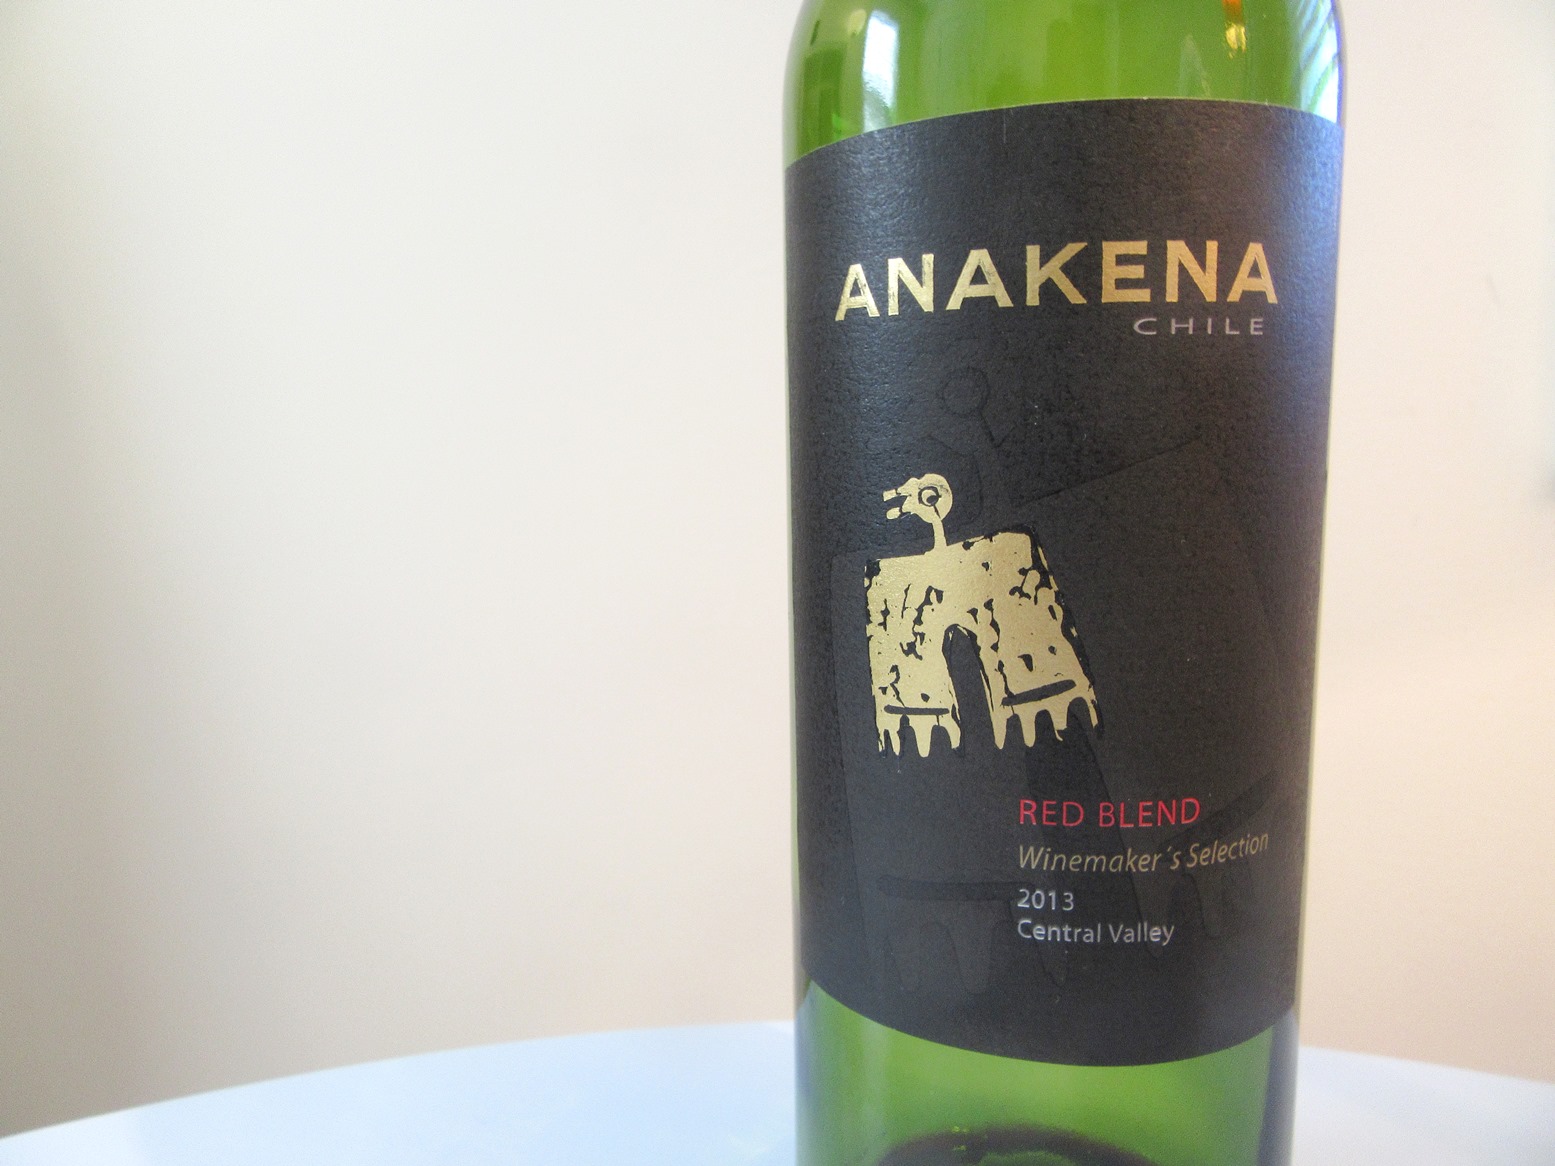 Anakena, Winemaker’s Selection Red Blend 2013, Central Valley, Chile, Wine Casual